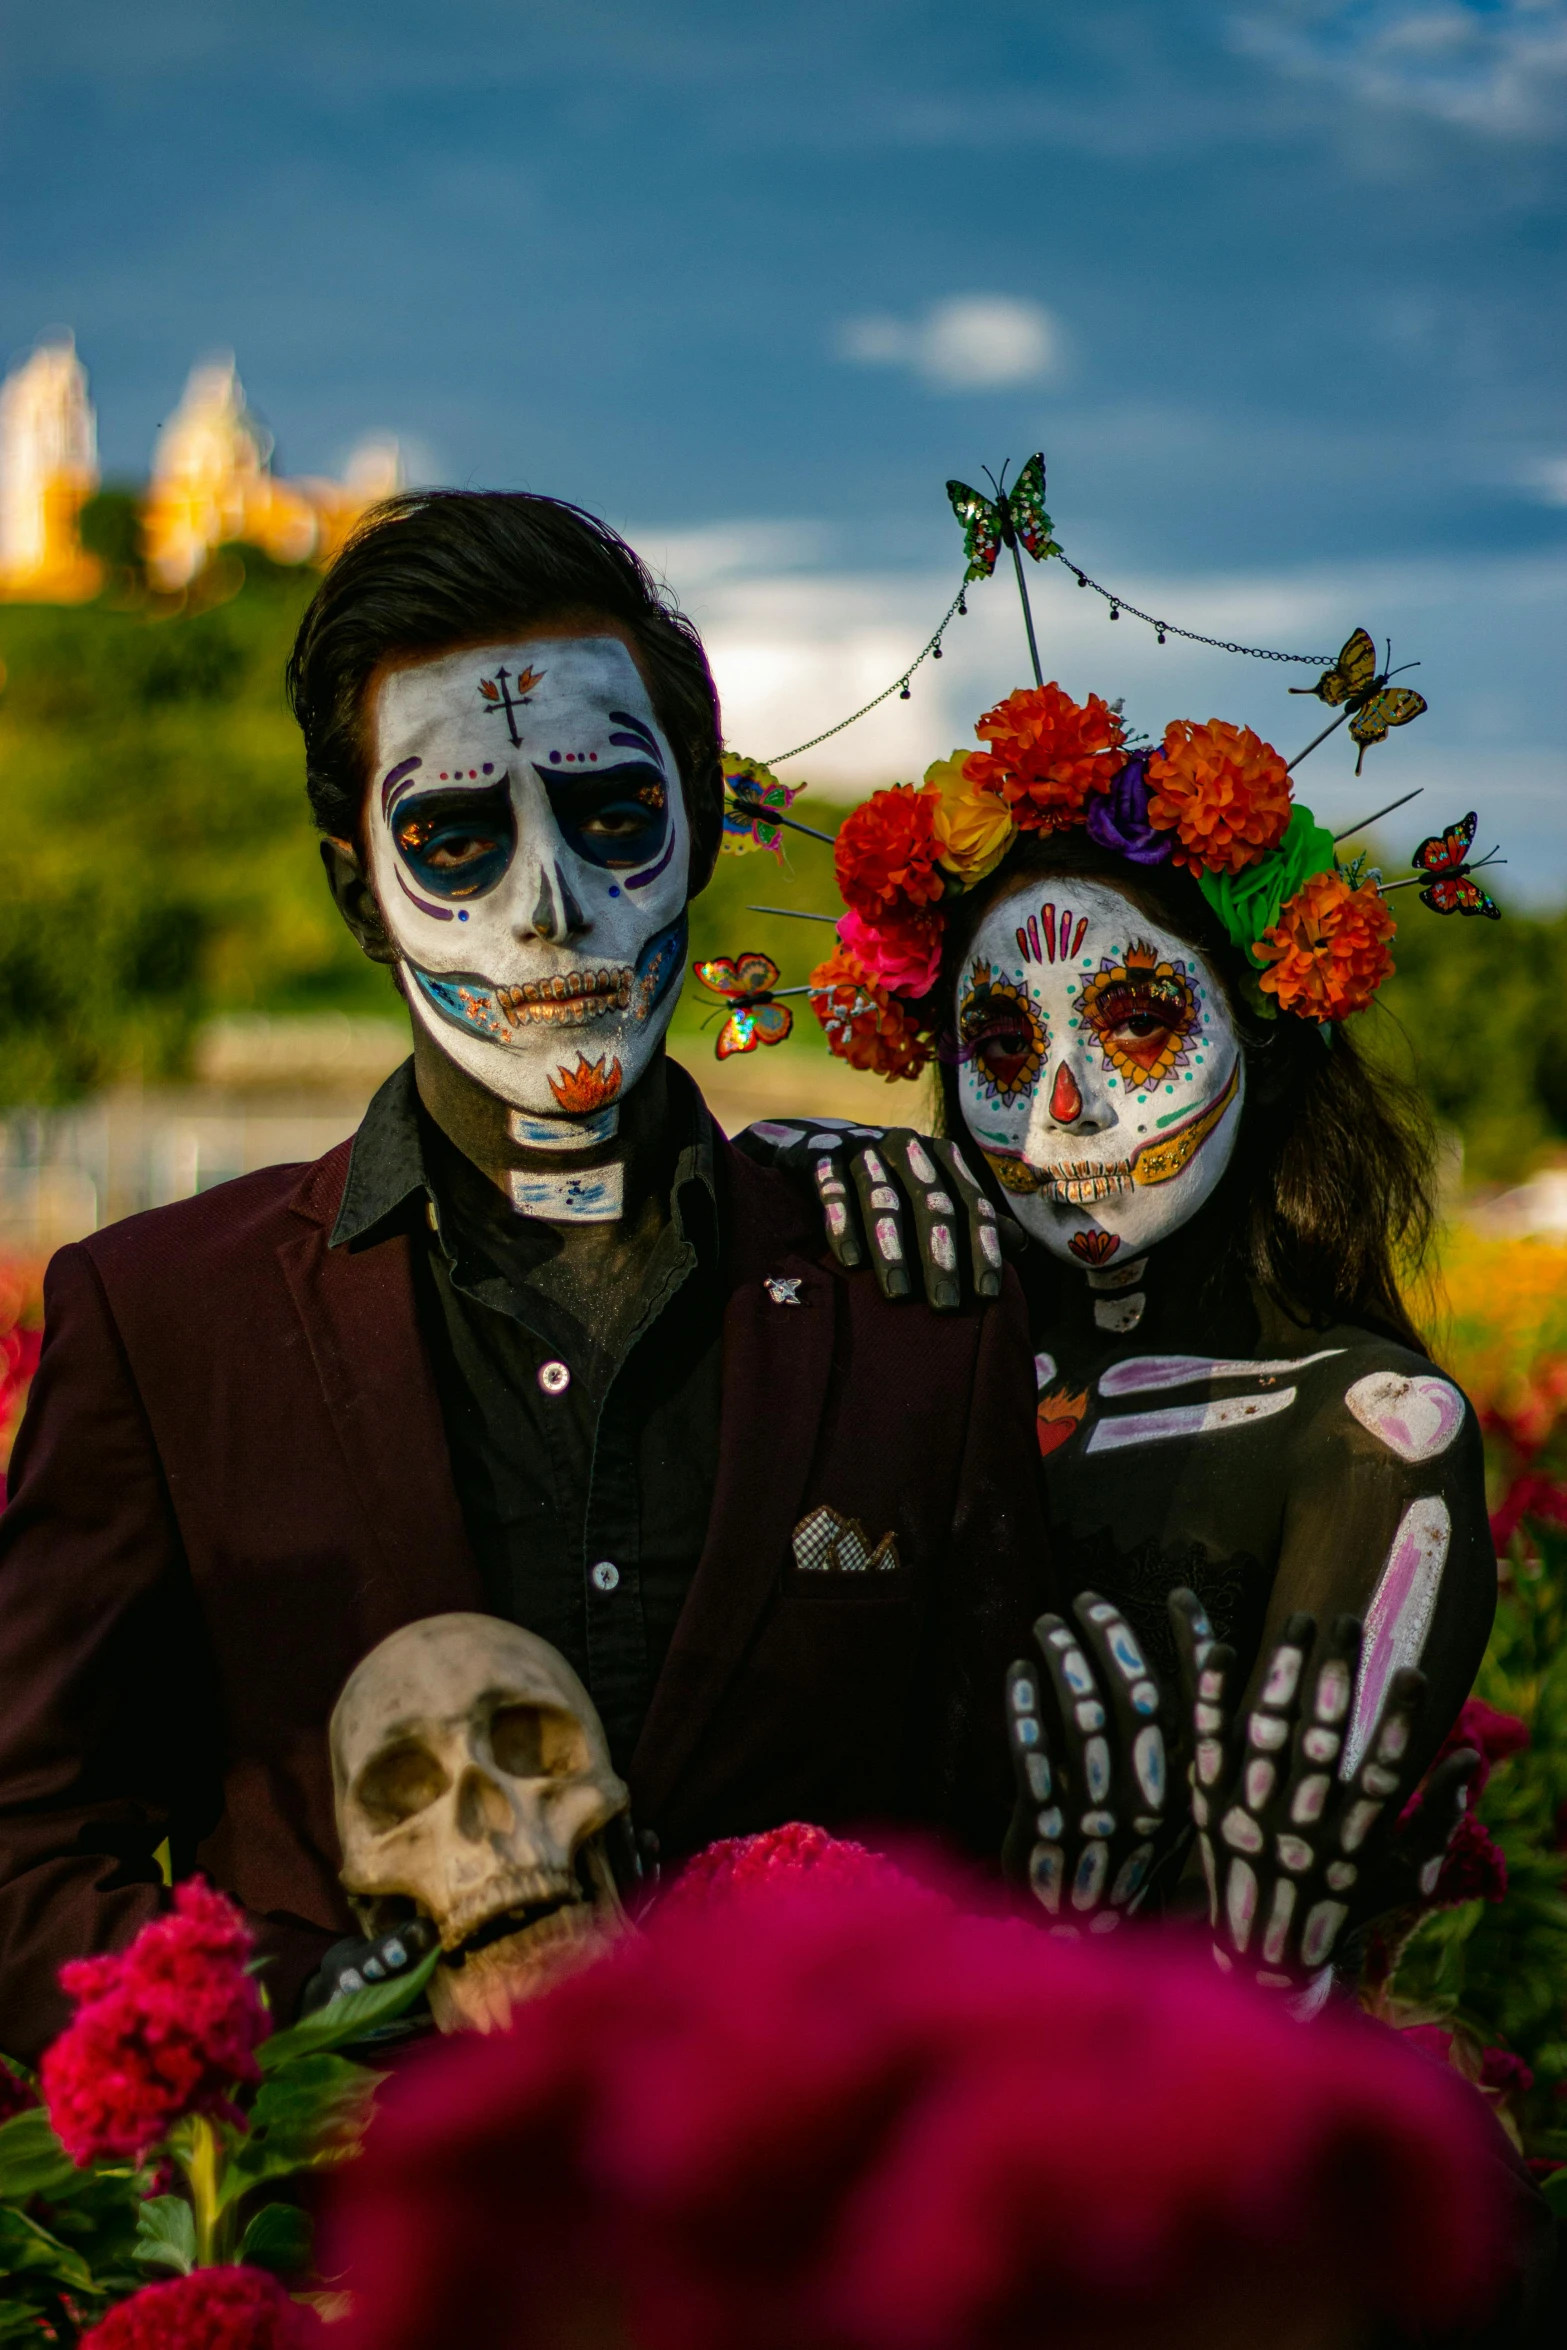 two people with skull makeup standing together